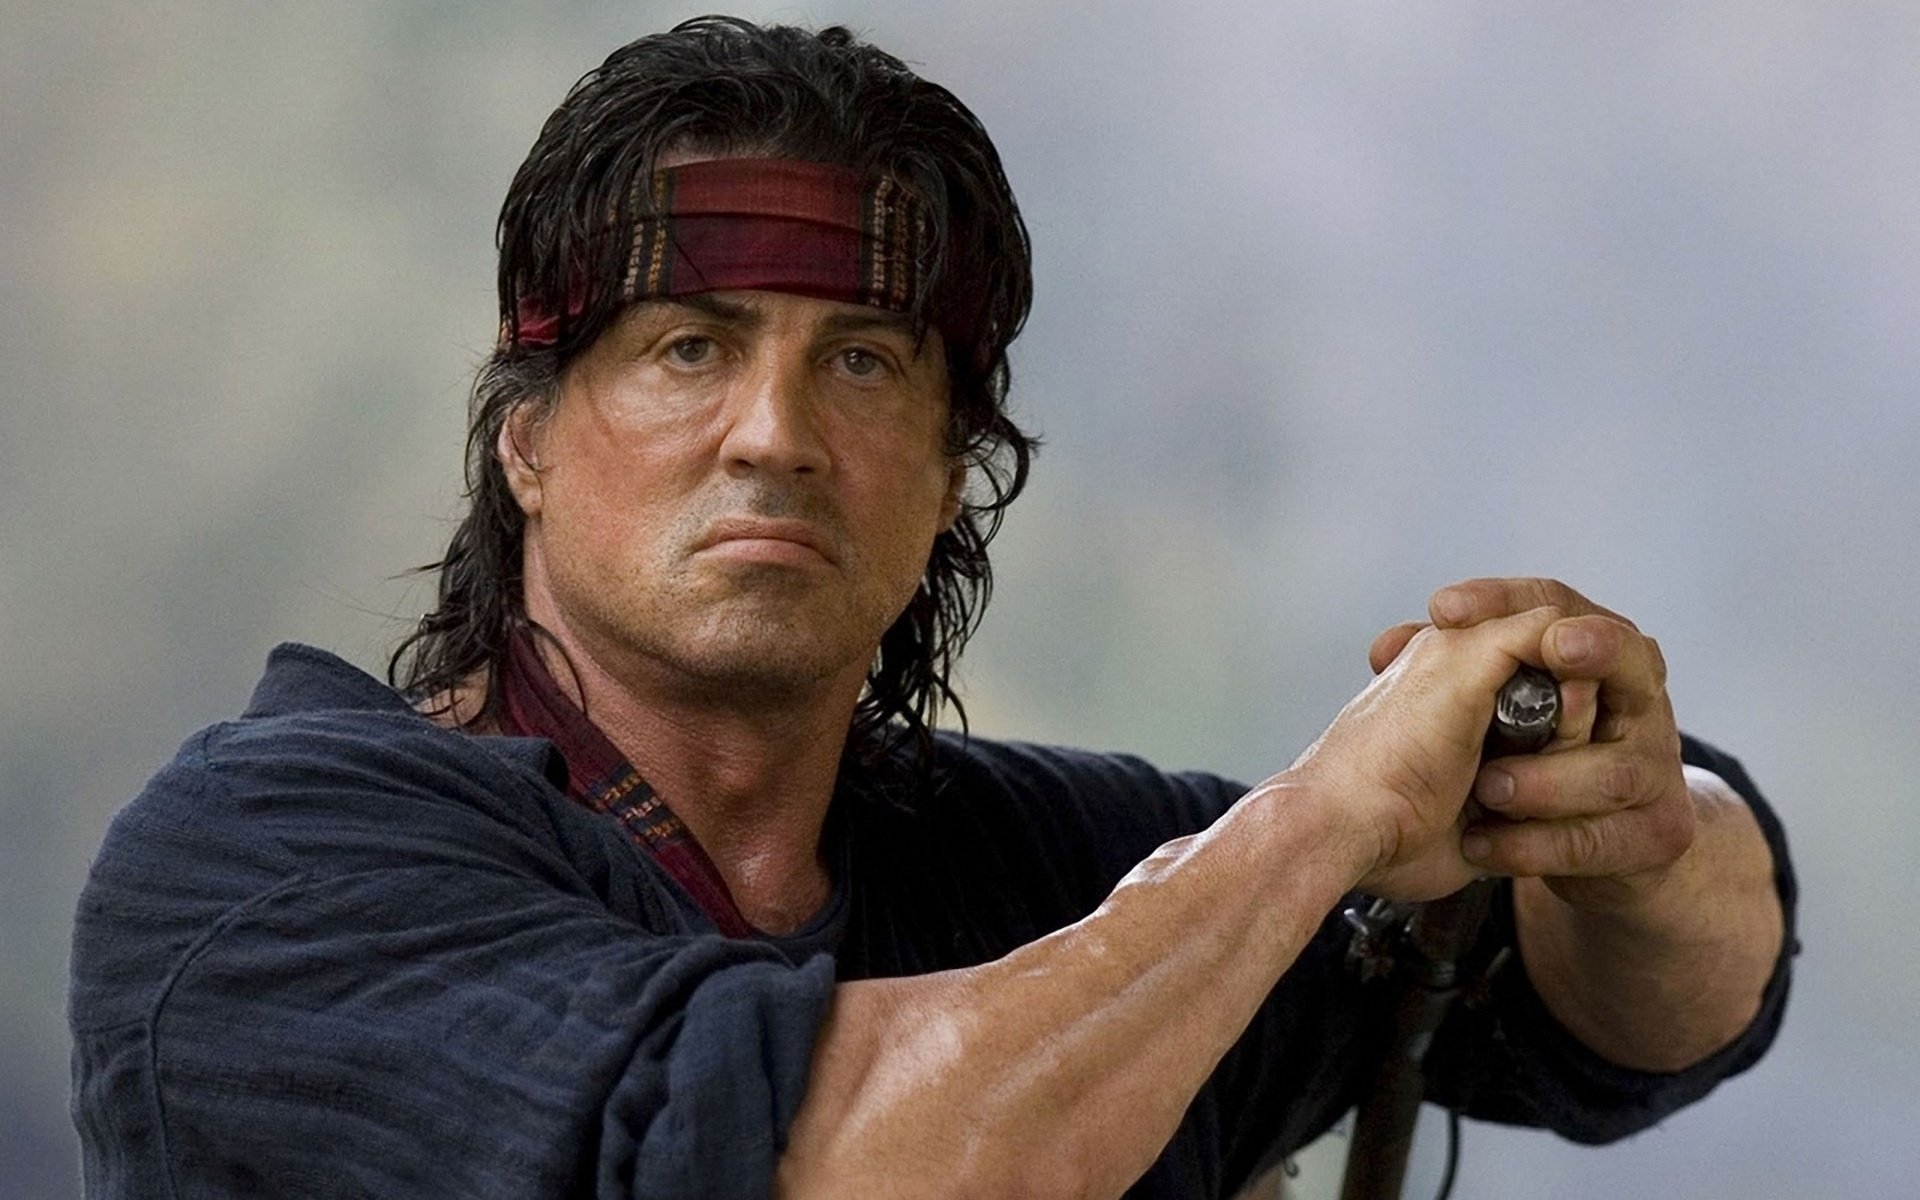 Wallpaper. Movies. photo. picture. Rambo Stallone, actor, the film